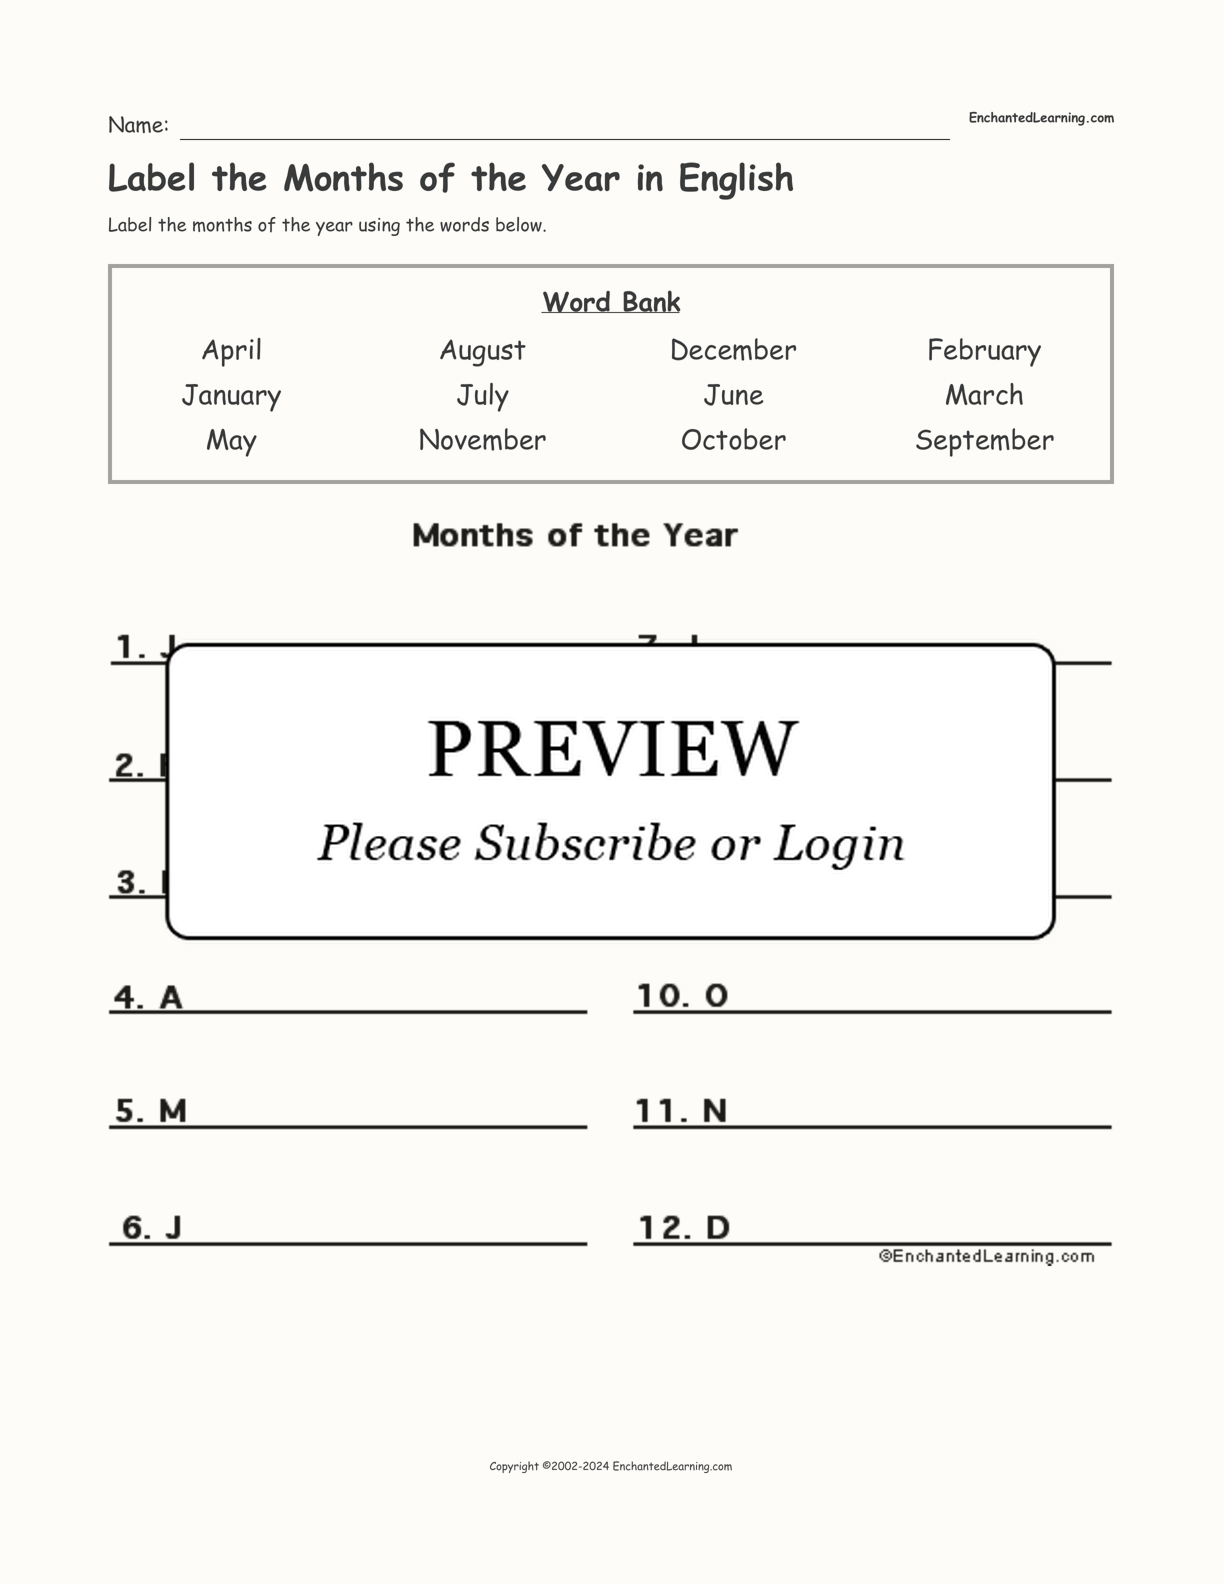 Label the Months of the Year in English interactive worksheet page 1